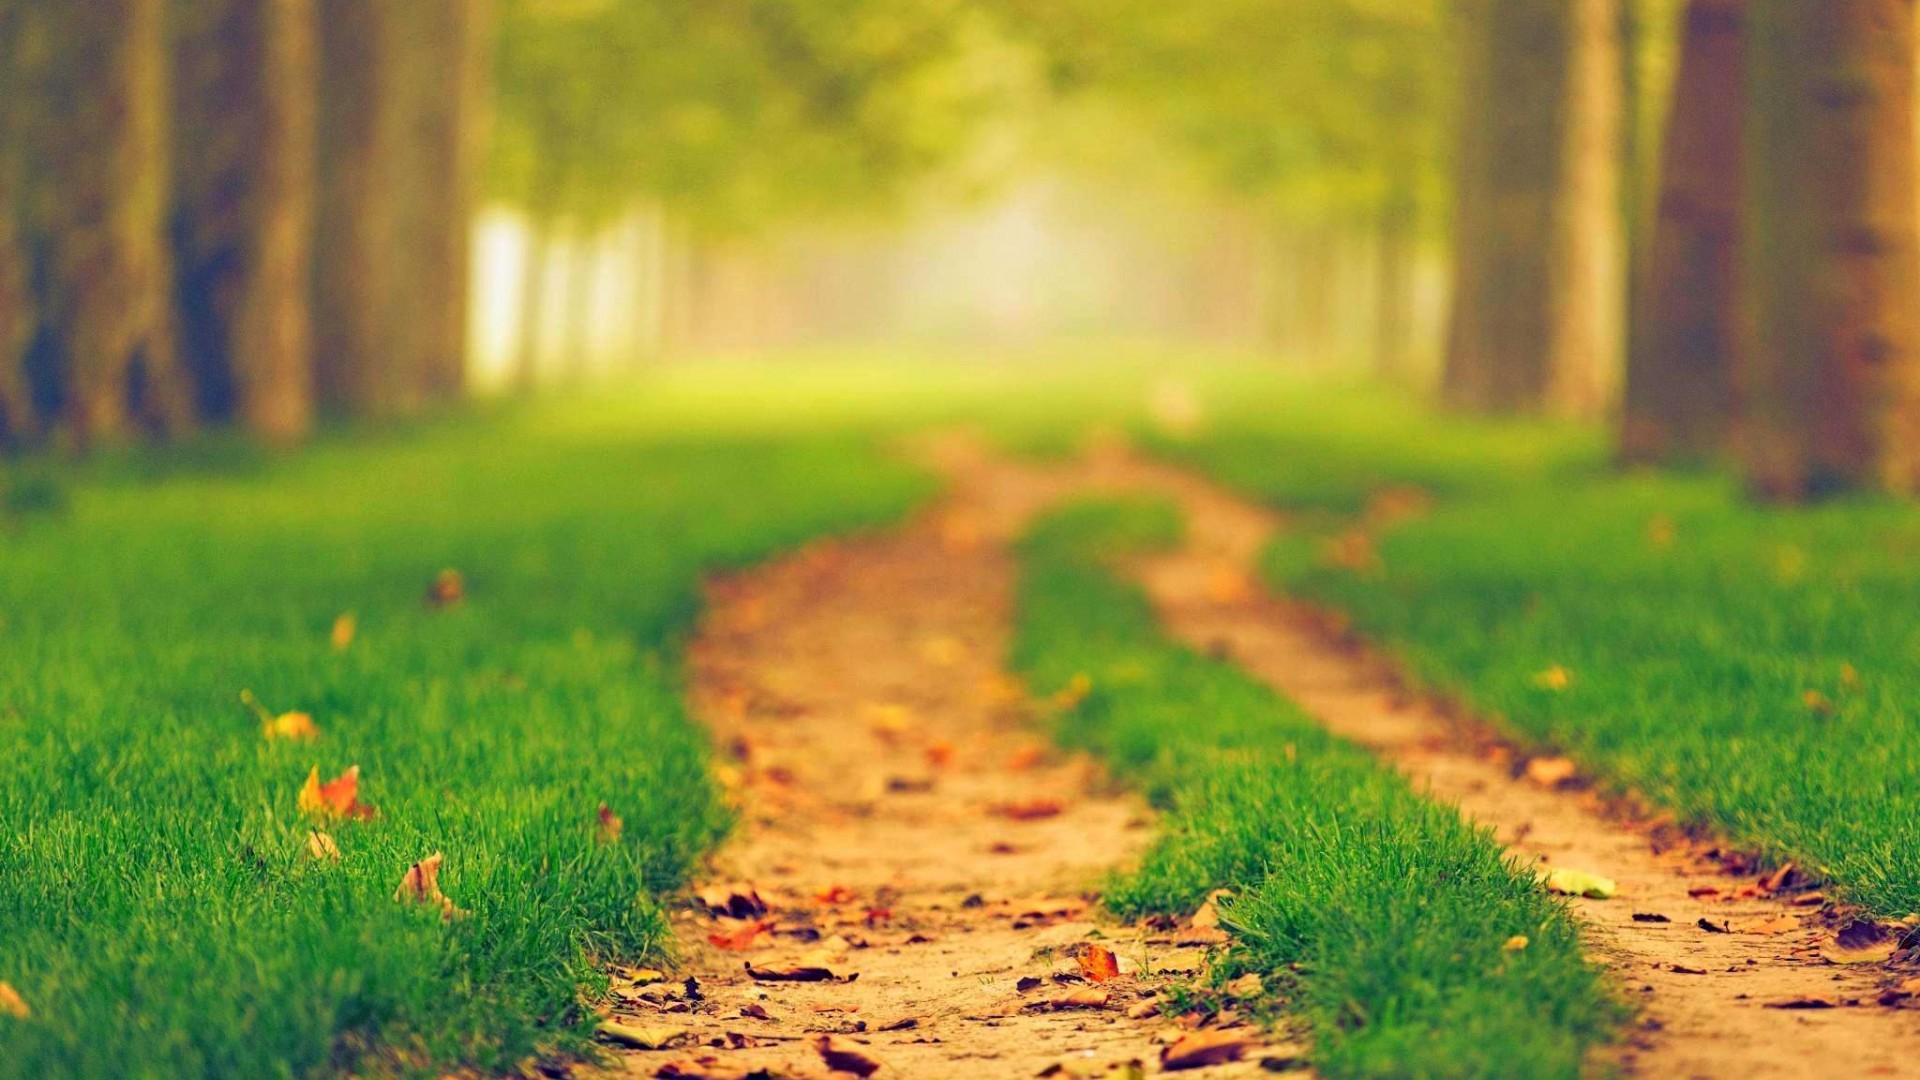 General 1920x1080 nature path blurred green depth of field leaves trees natural light plants grass